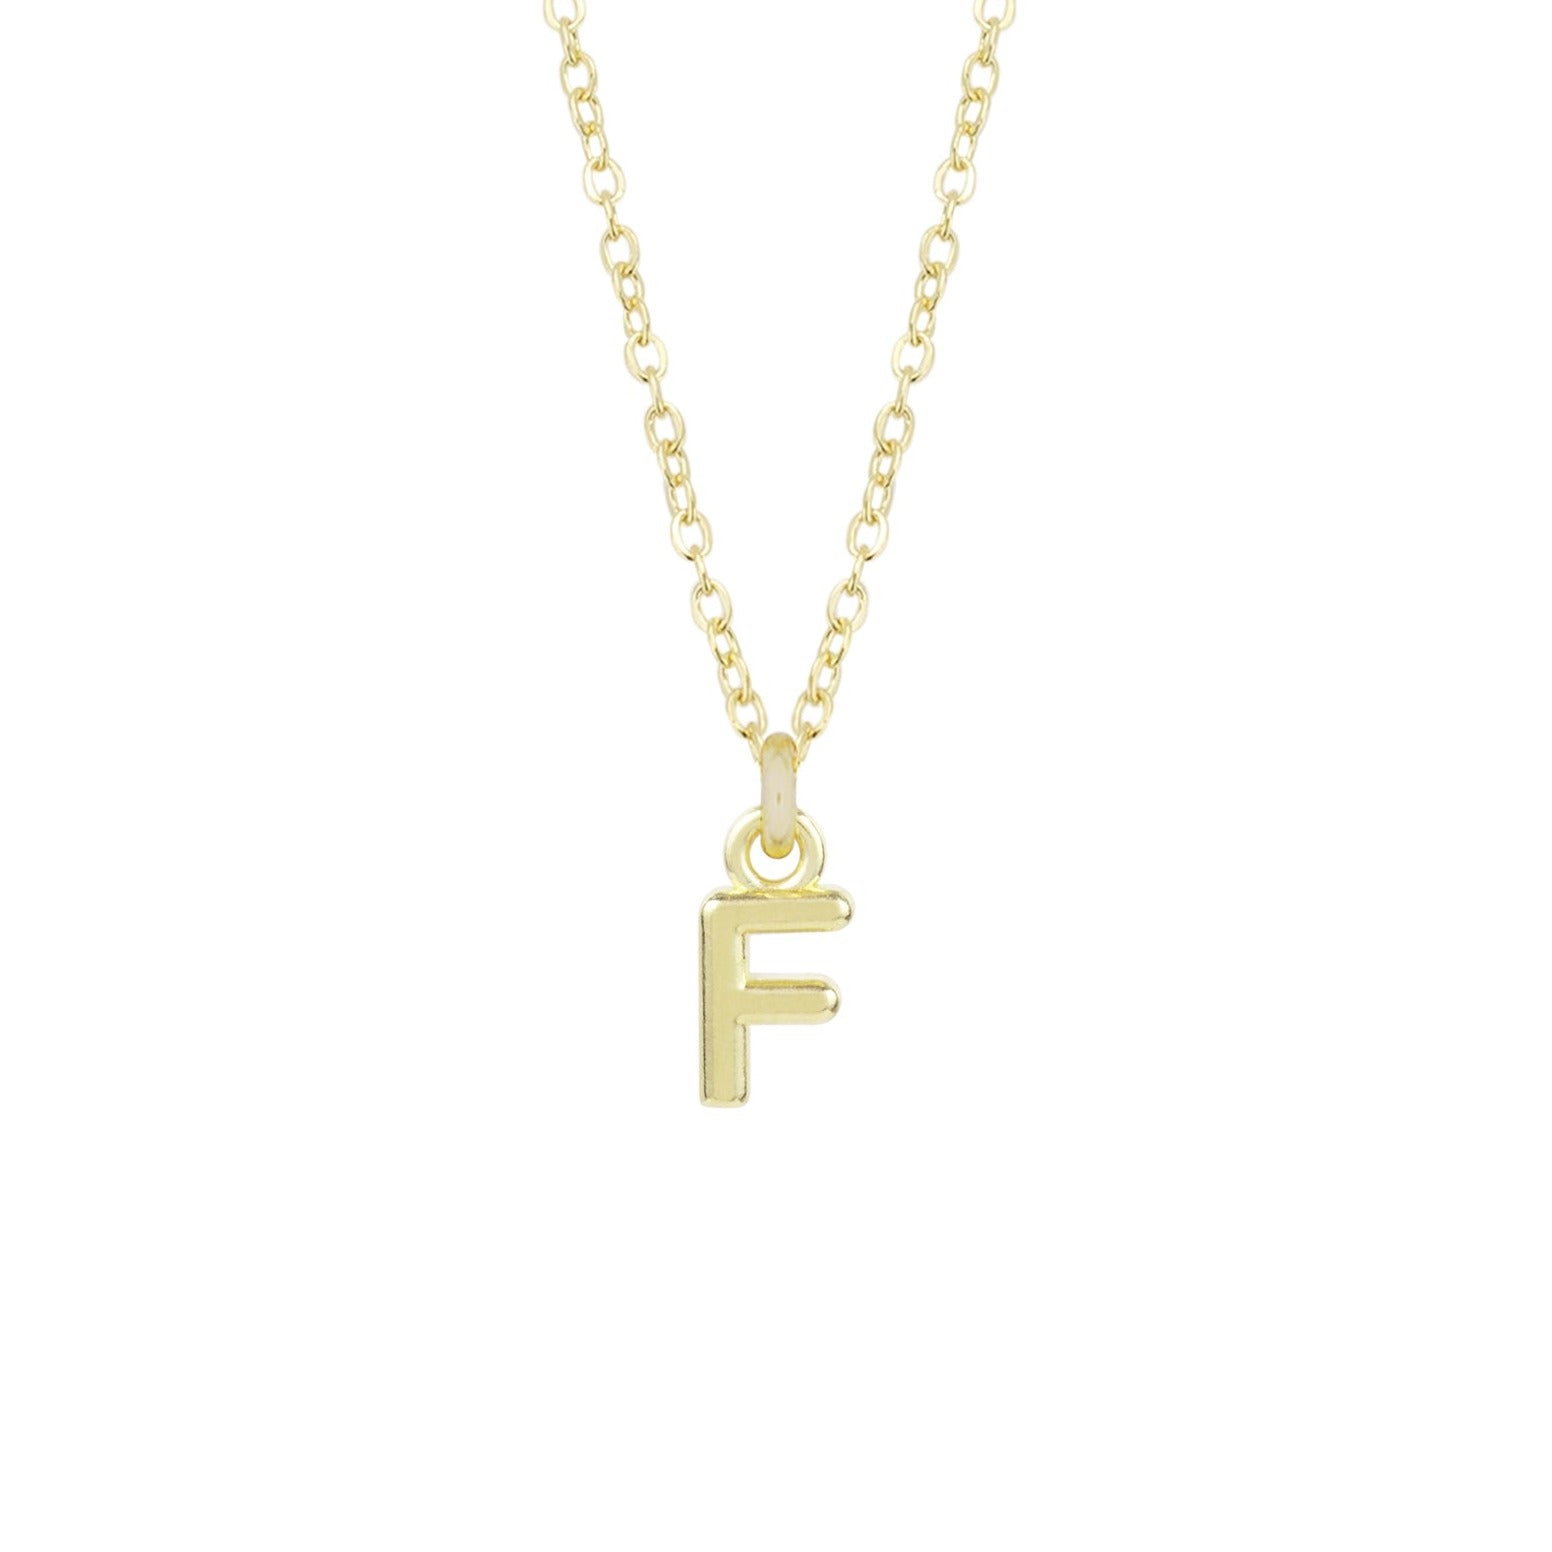 F Gold Initial Necklace by Katie Dean Jewelry, made in America, perfect for the dainty minimal jewelry lovers